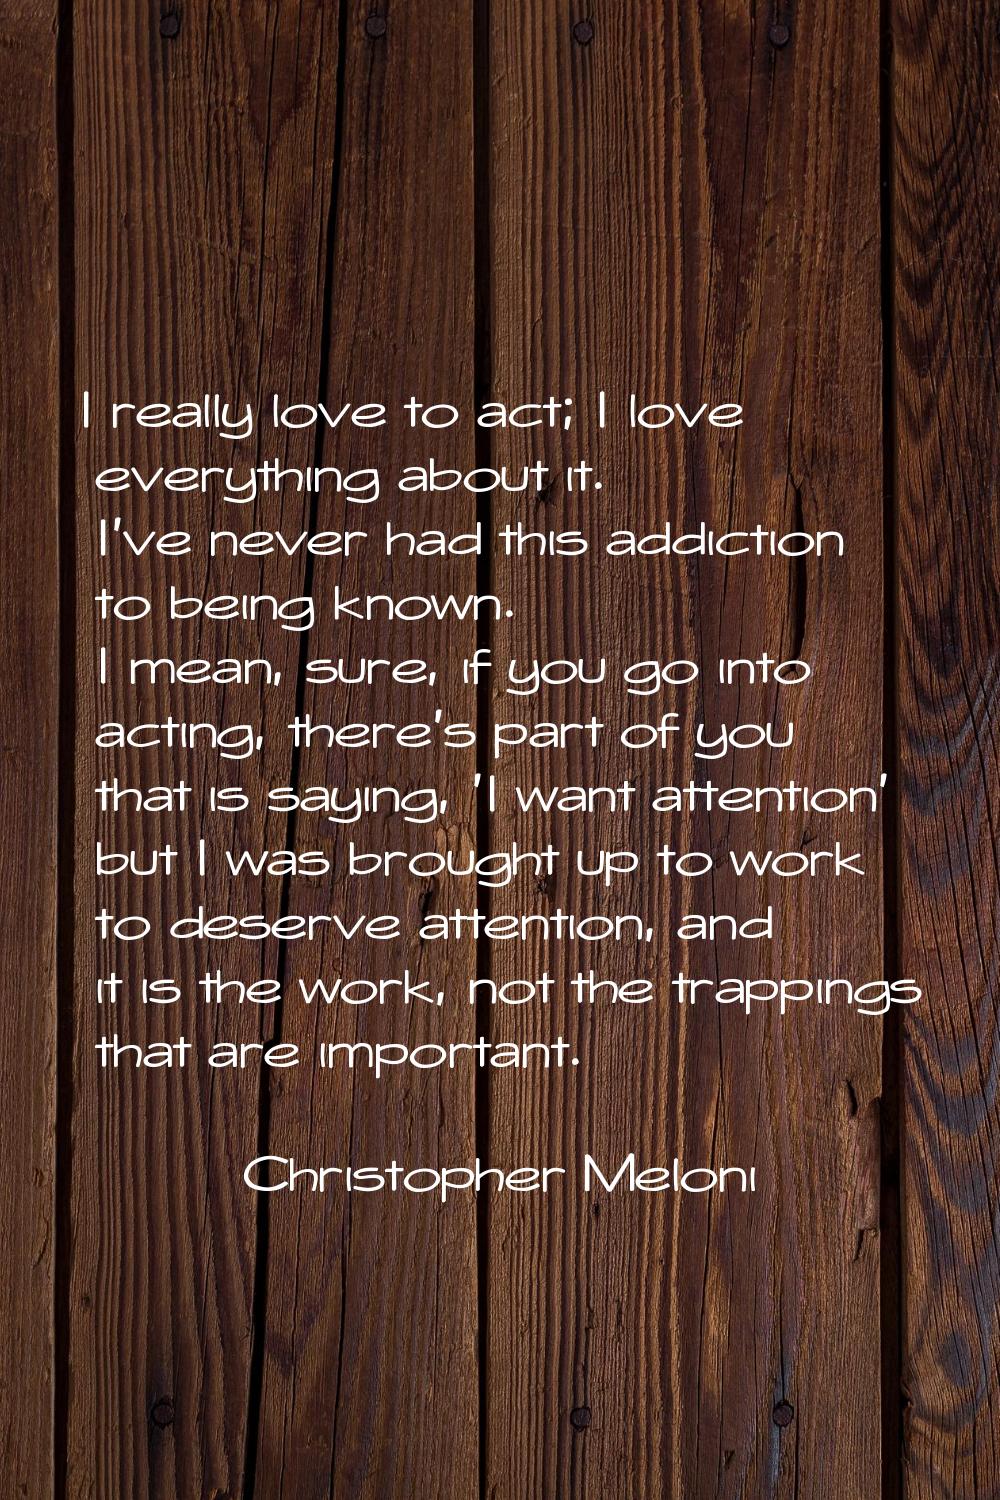 I really love to act; I love everything about it. I've never had this addiction to being known. I m